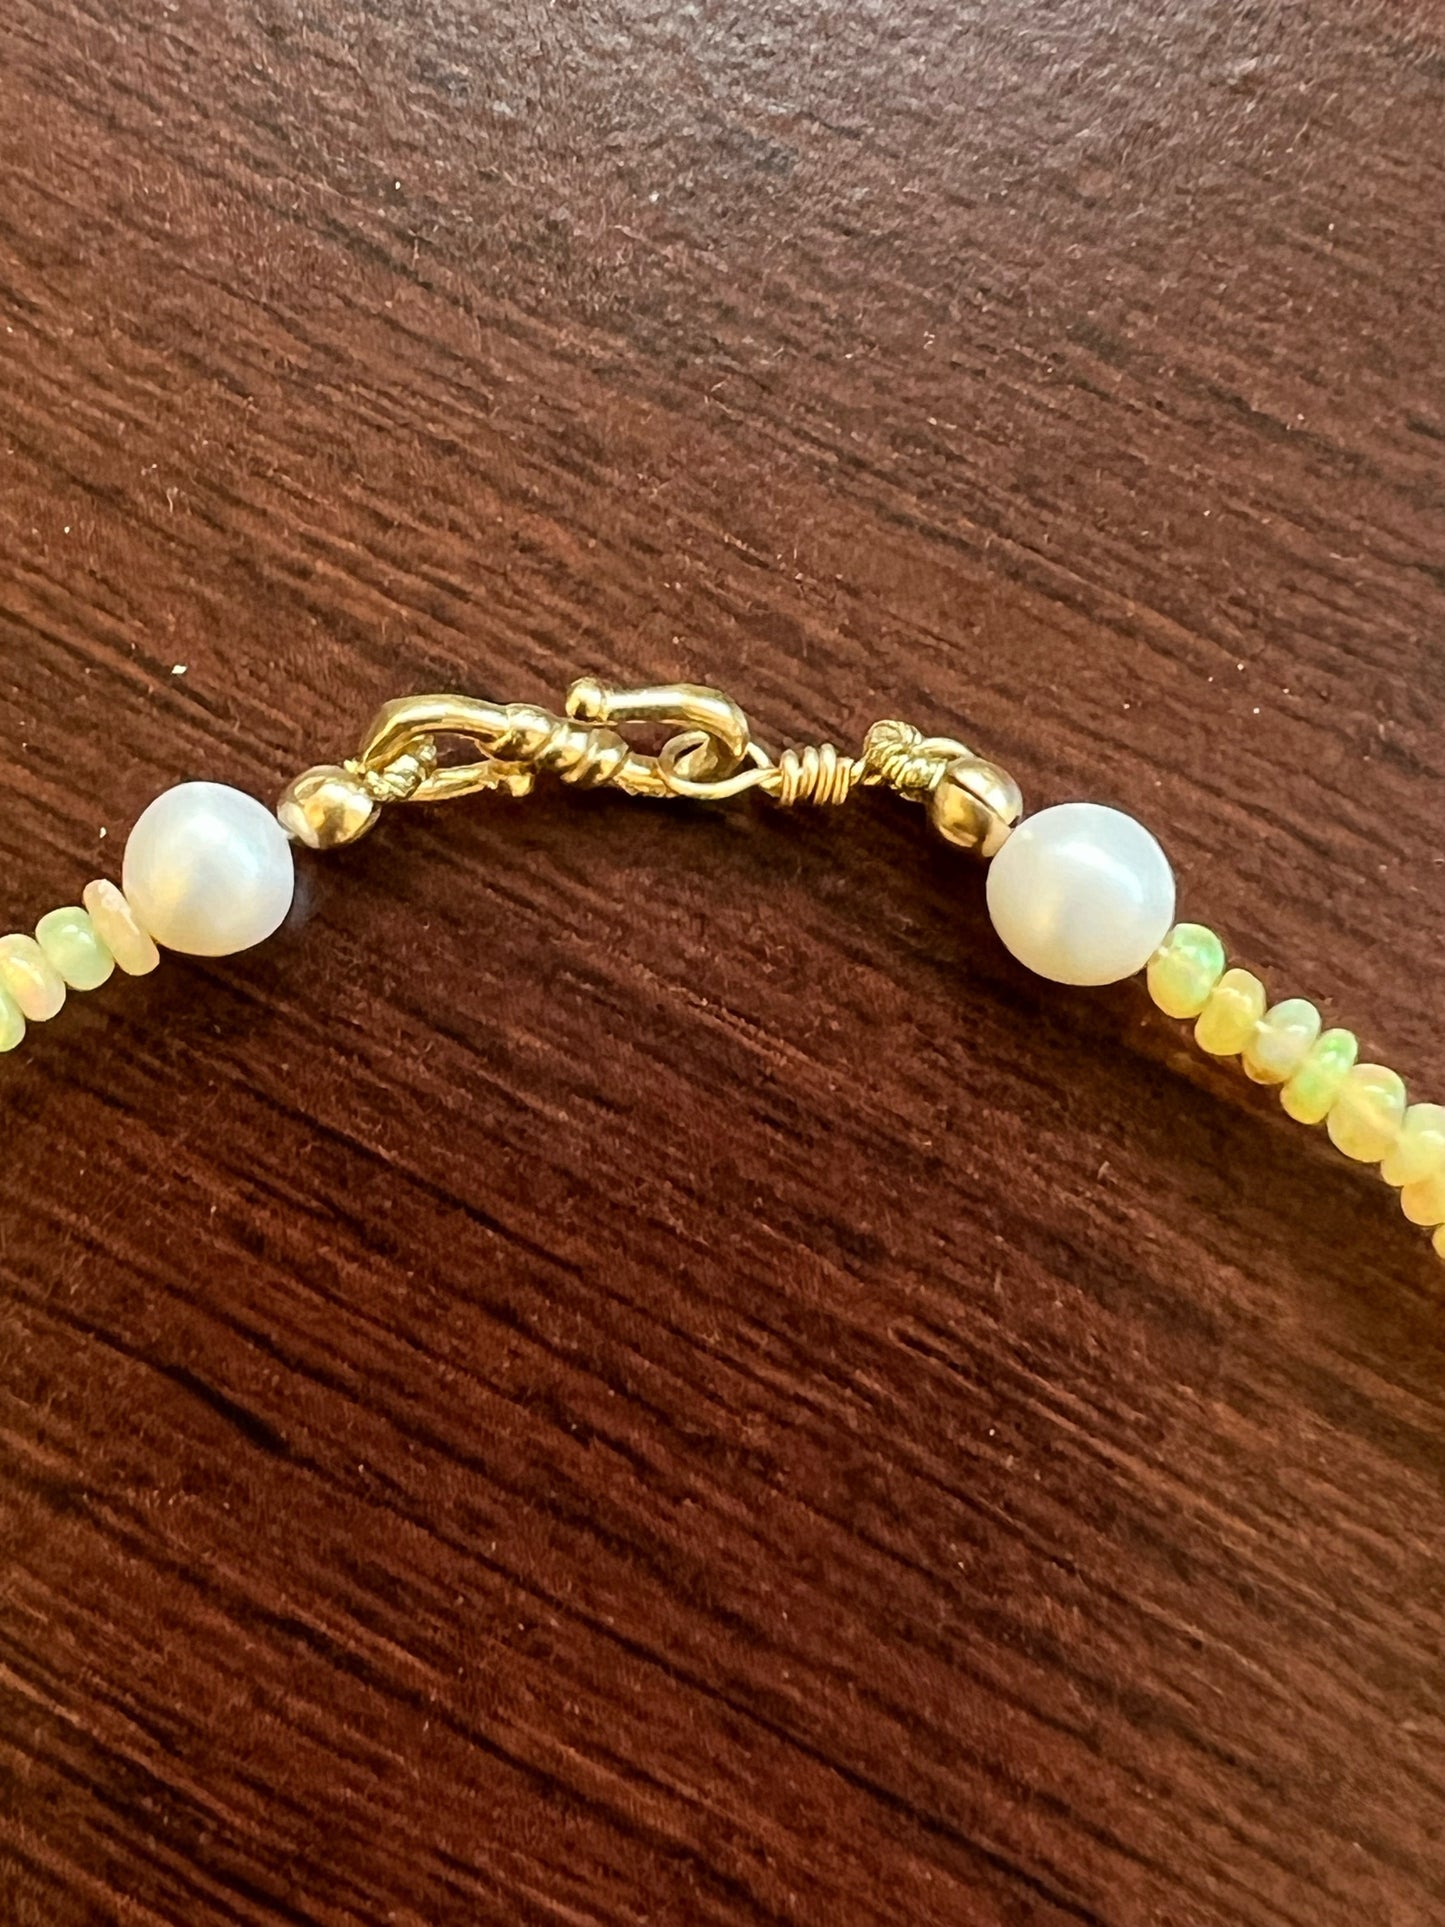 Ethiopian Opal graduated bead necklace with 18KY gold 'S' clasp and cultured pearls